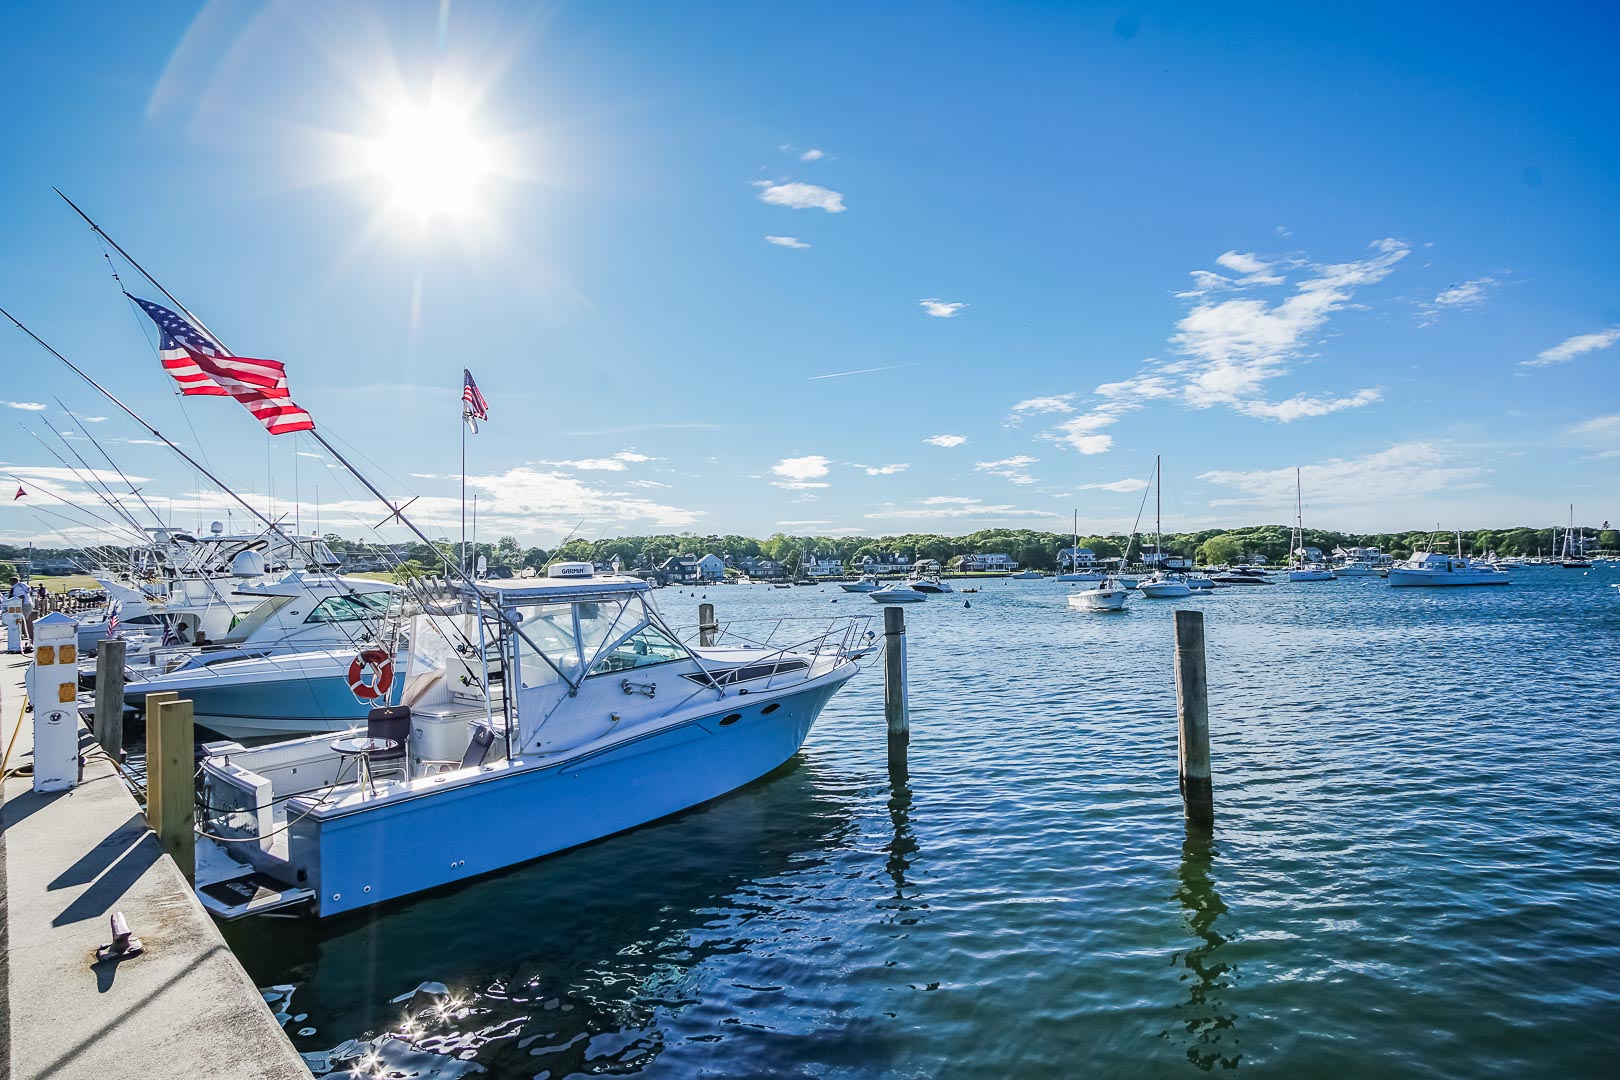 A beautiful and relaxing view from VRI's Harbor Landing Resort in Massachusetts.